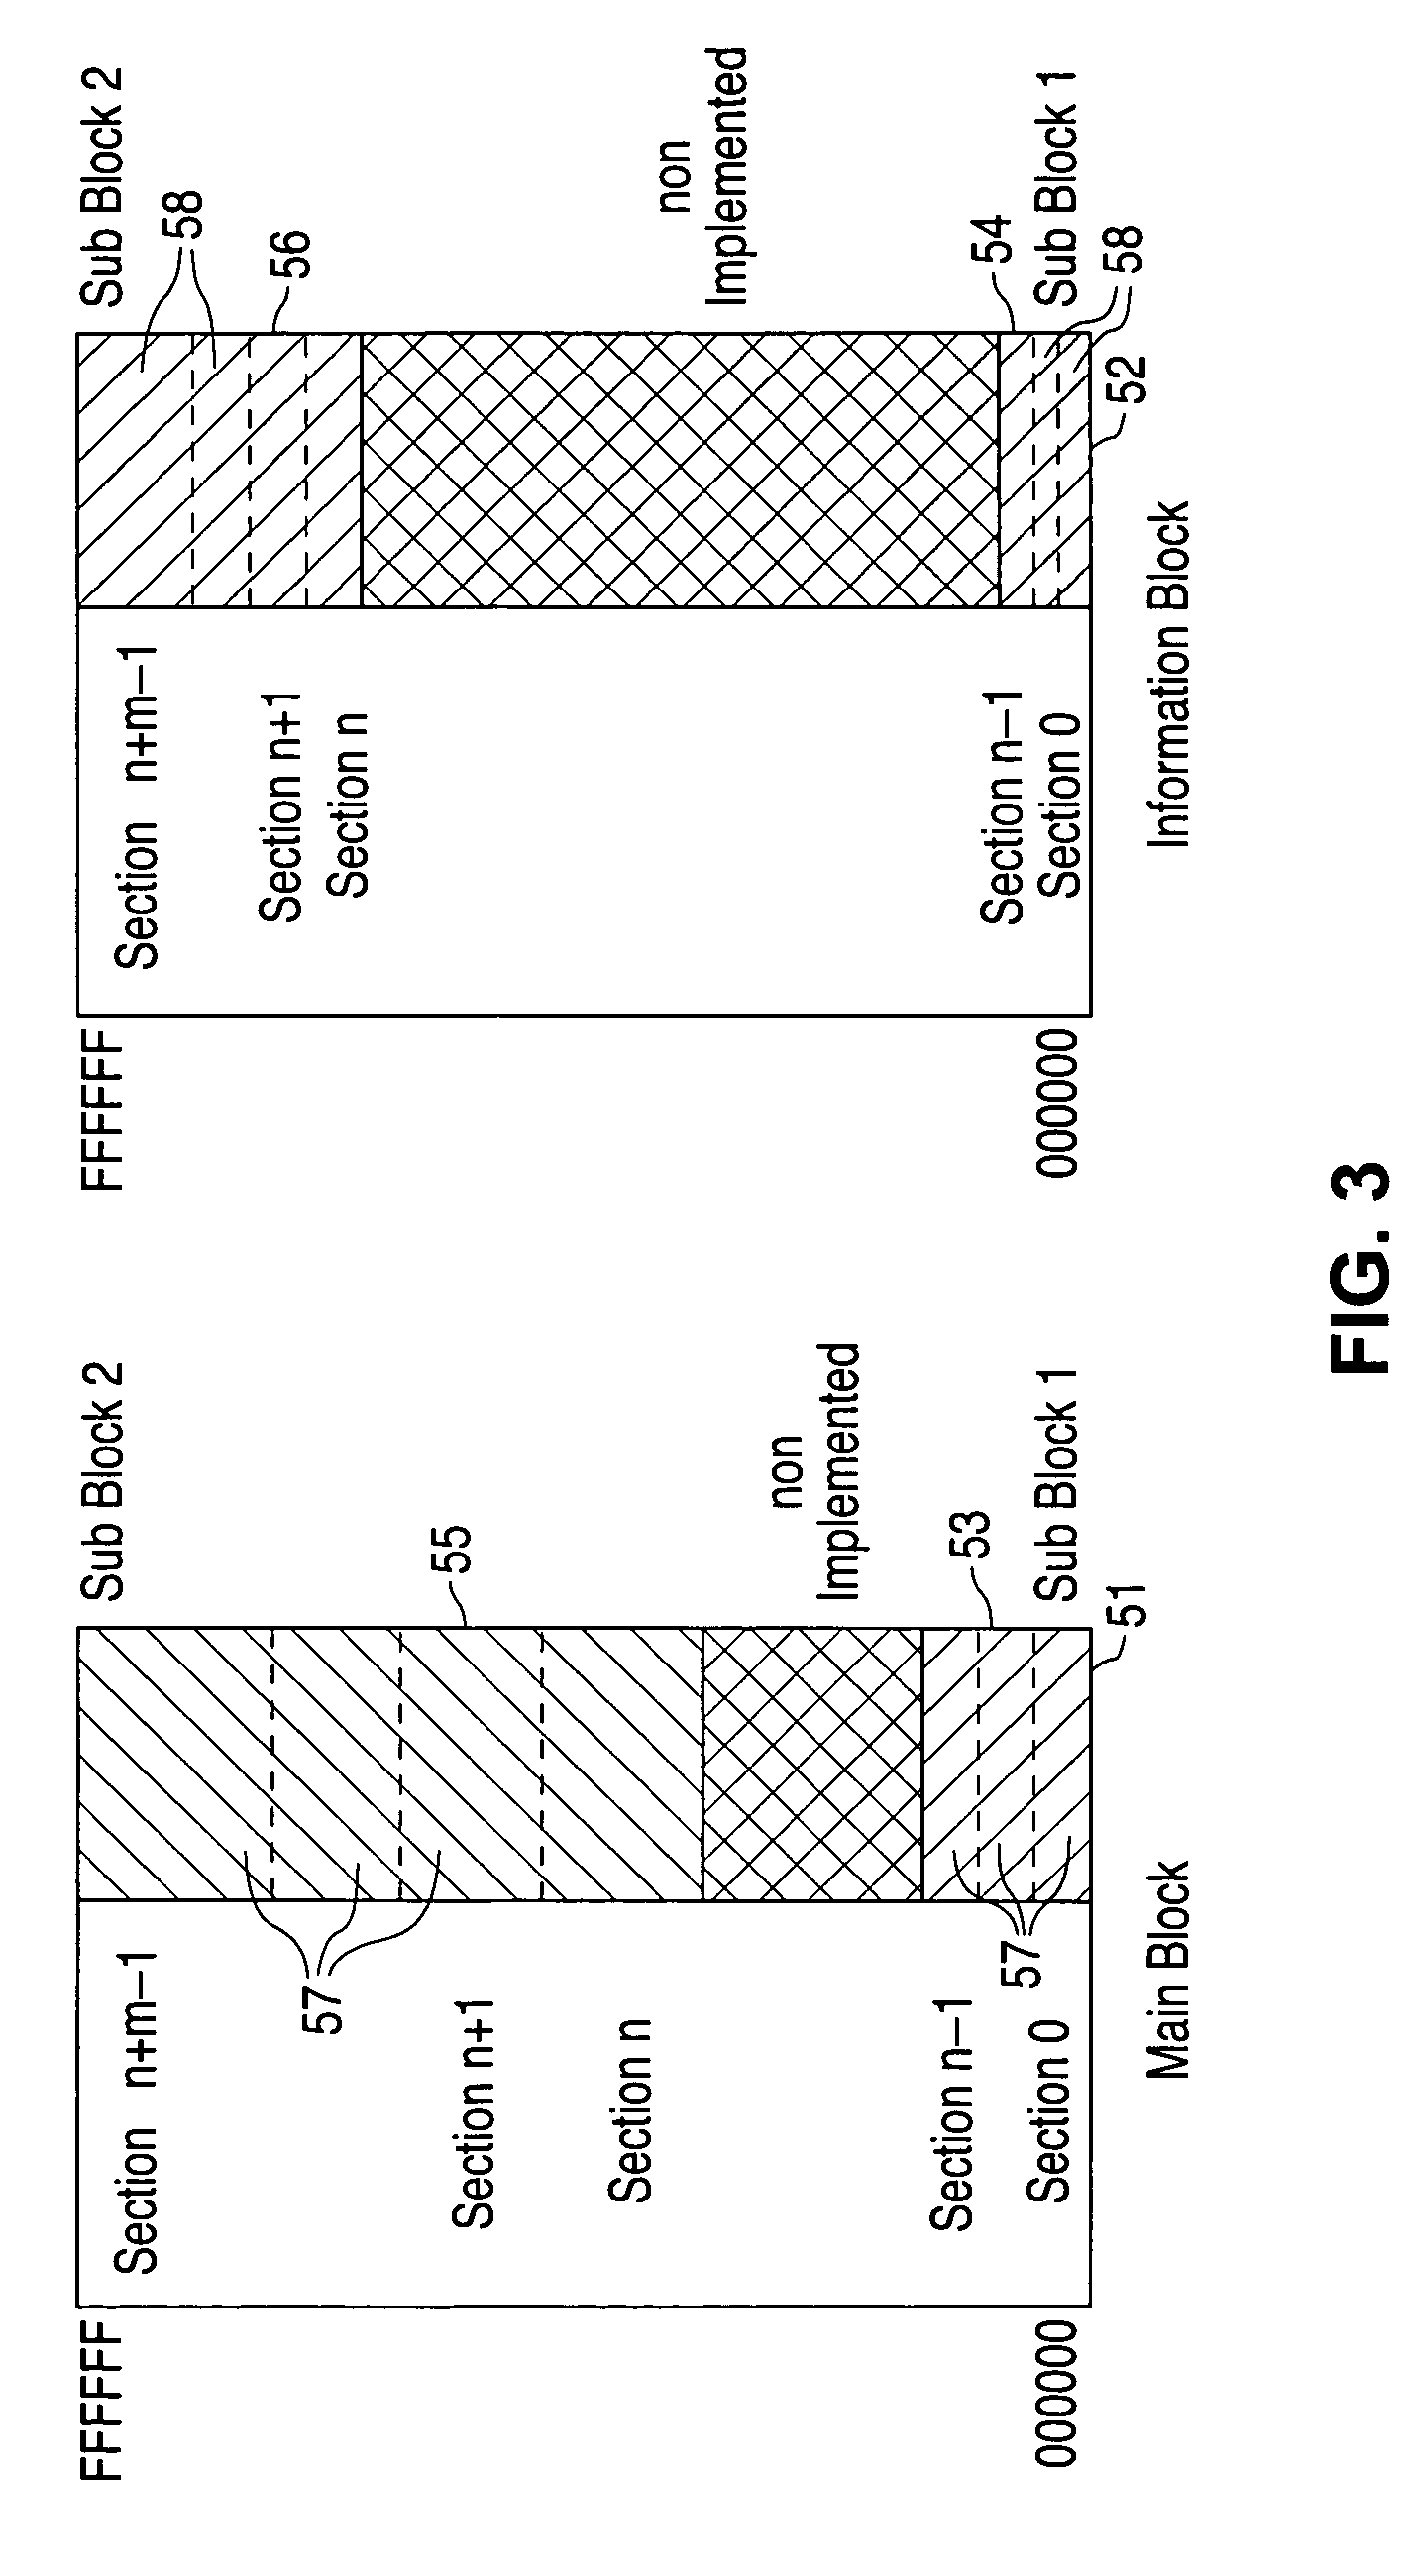 Memory interface optimized for stacked configurations